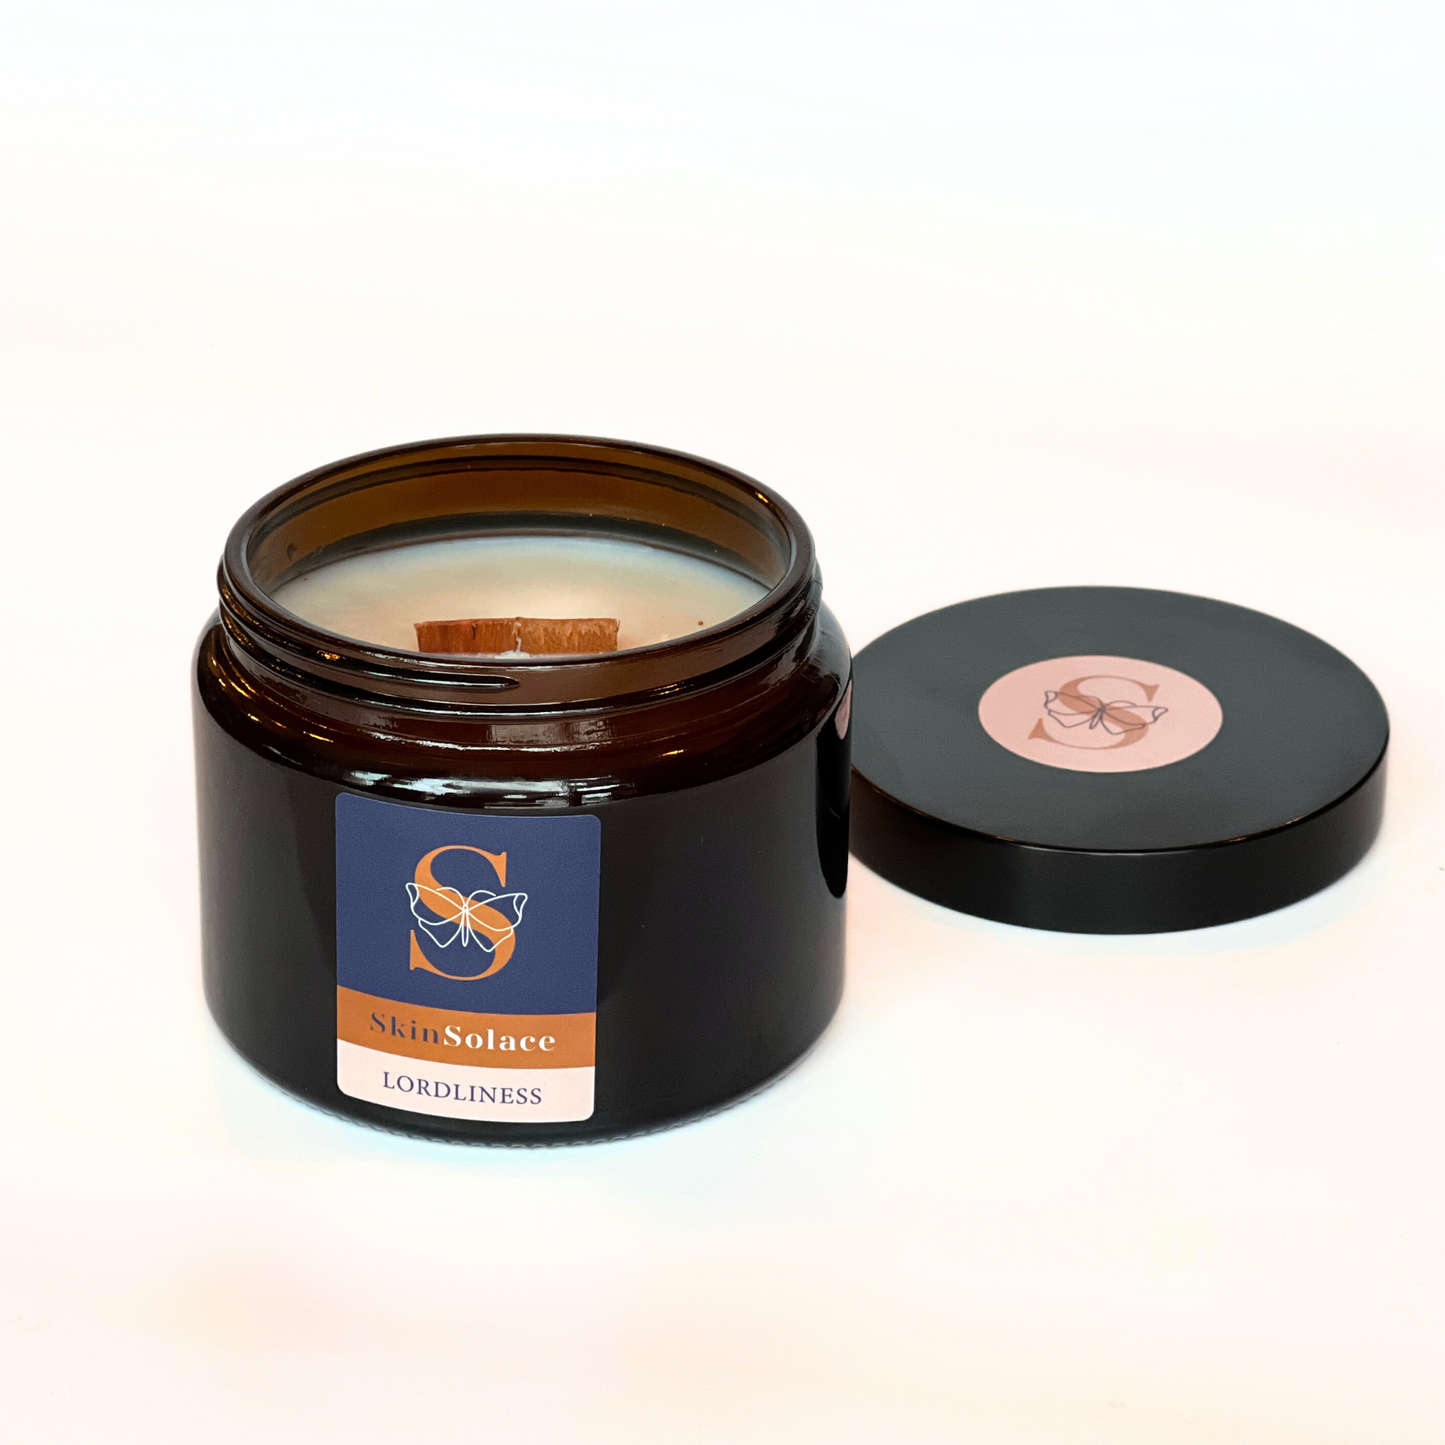 Lordliness Aroma Candle